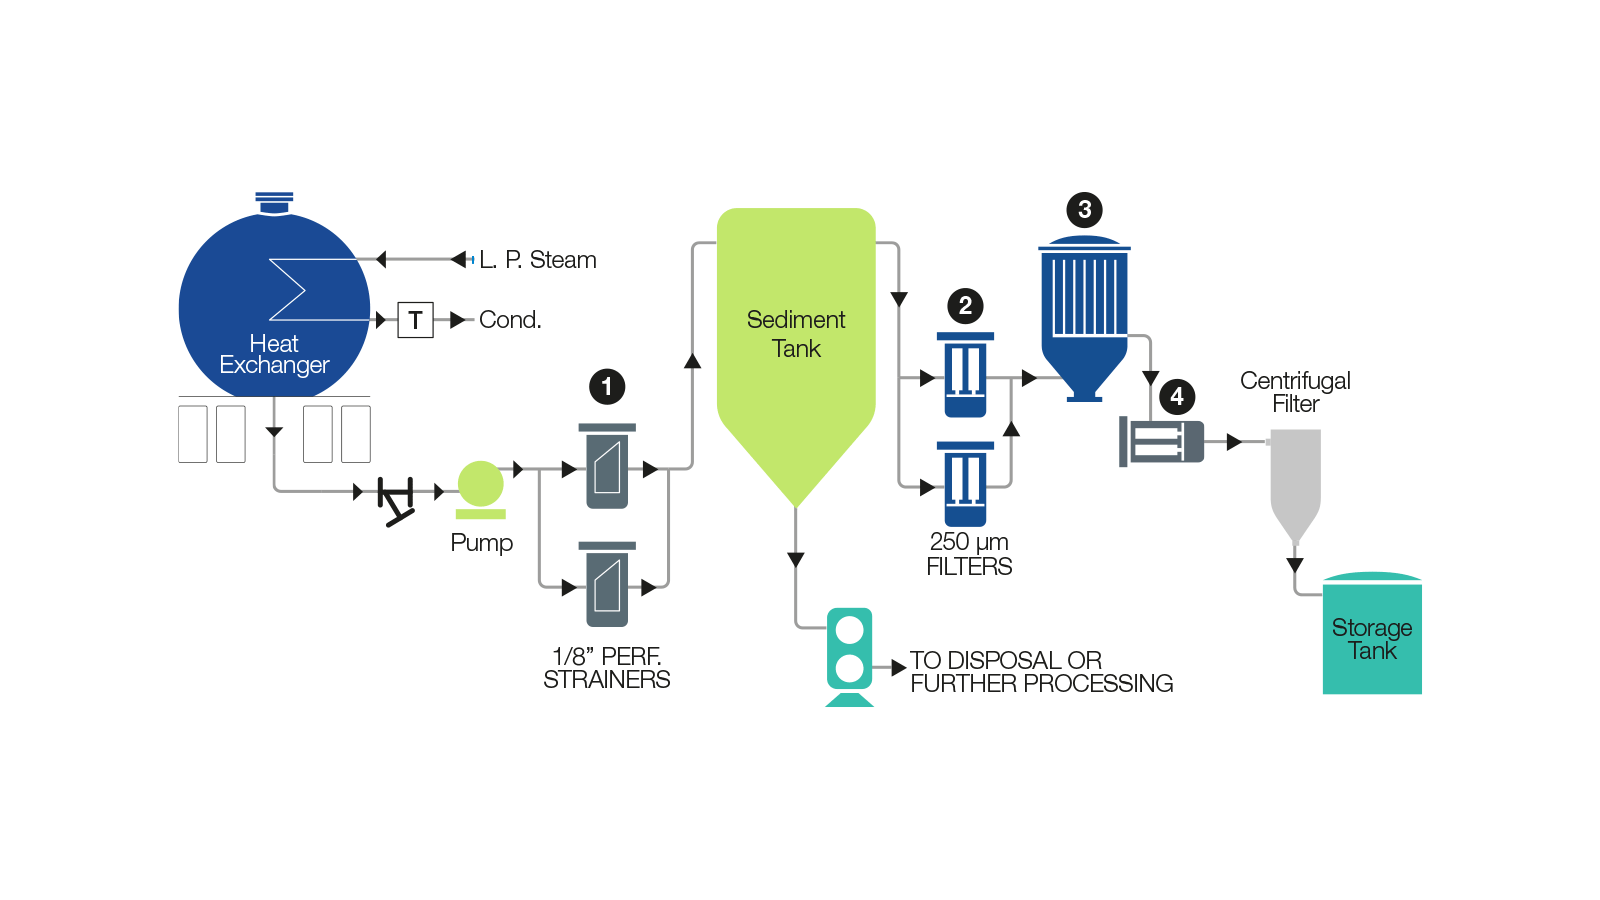 tallow feed filters animated diagram
